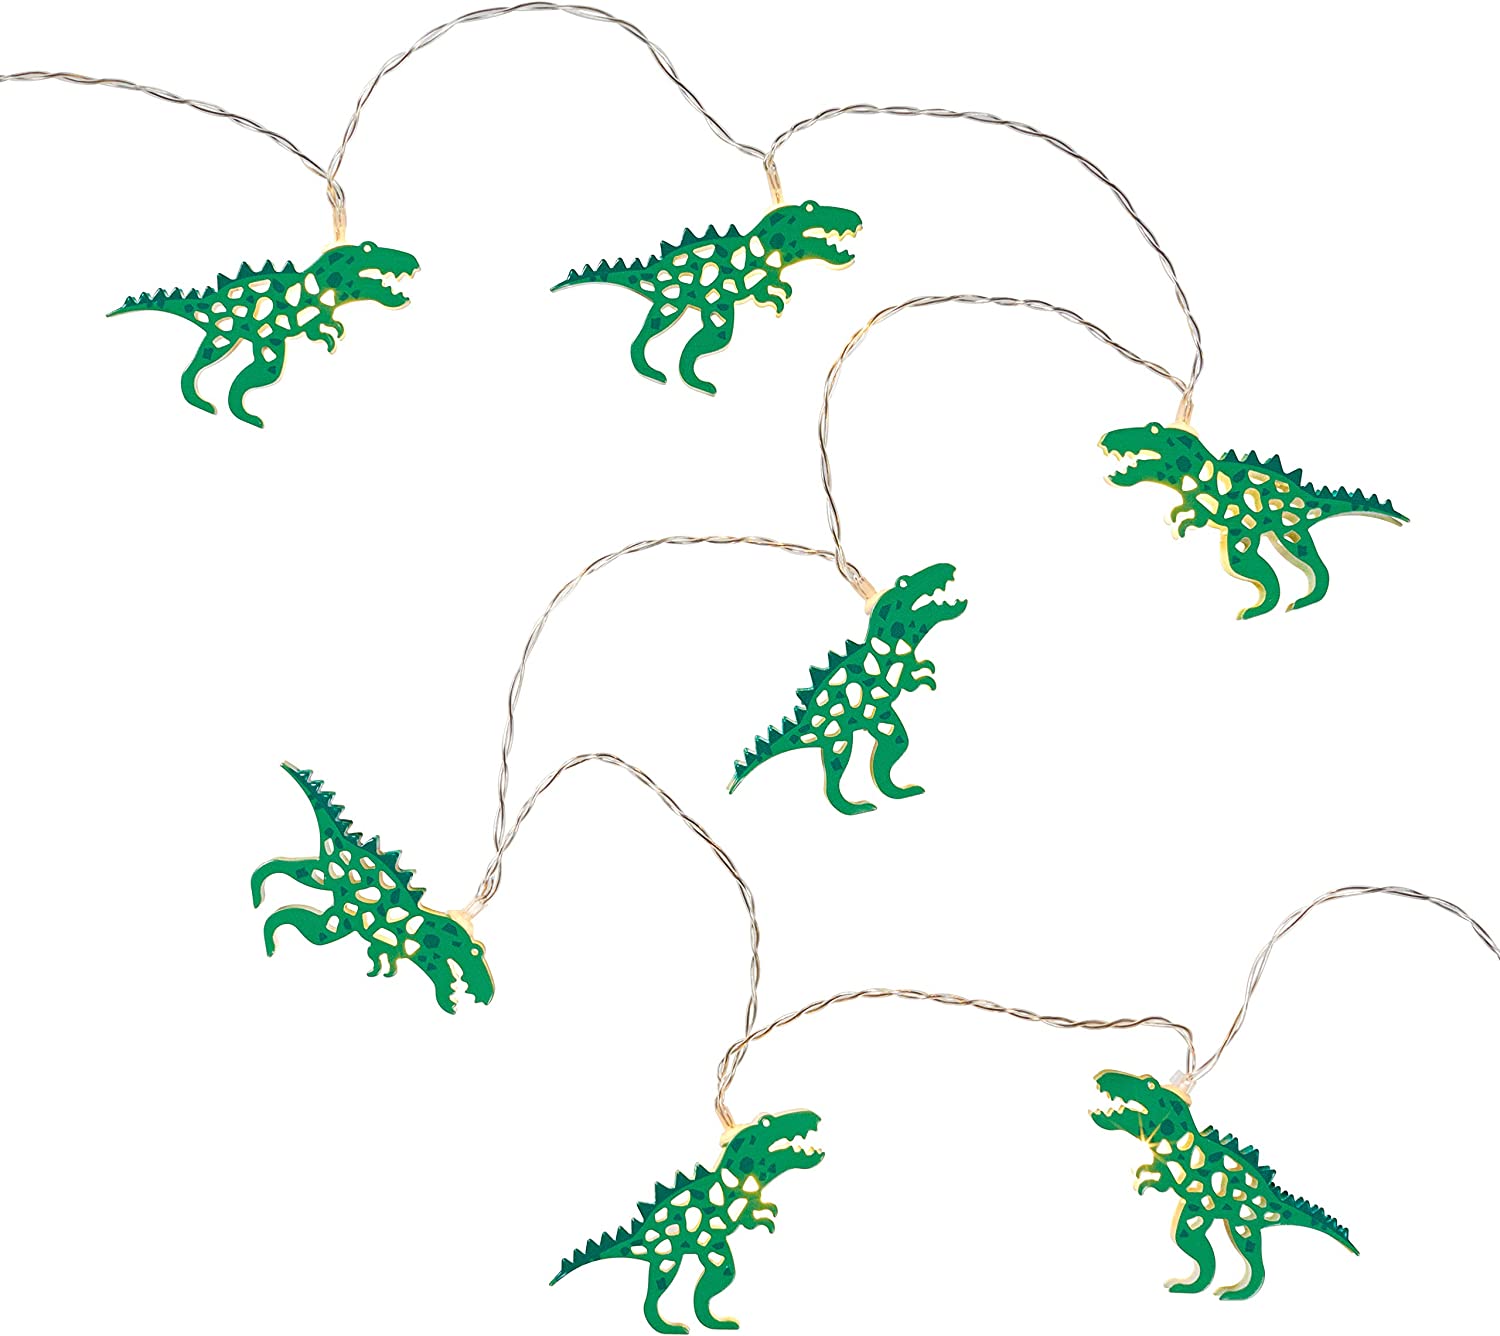 dinosaur string lights for a room decoration - part of a collection of gift ideas for kids who love dinosaurs